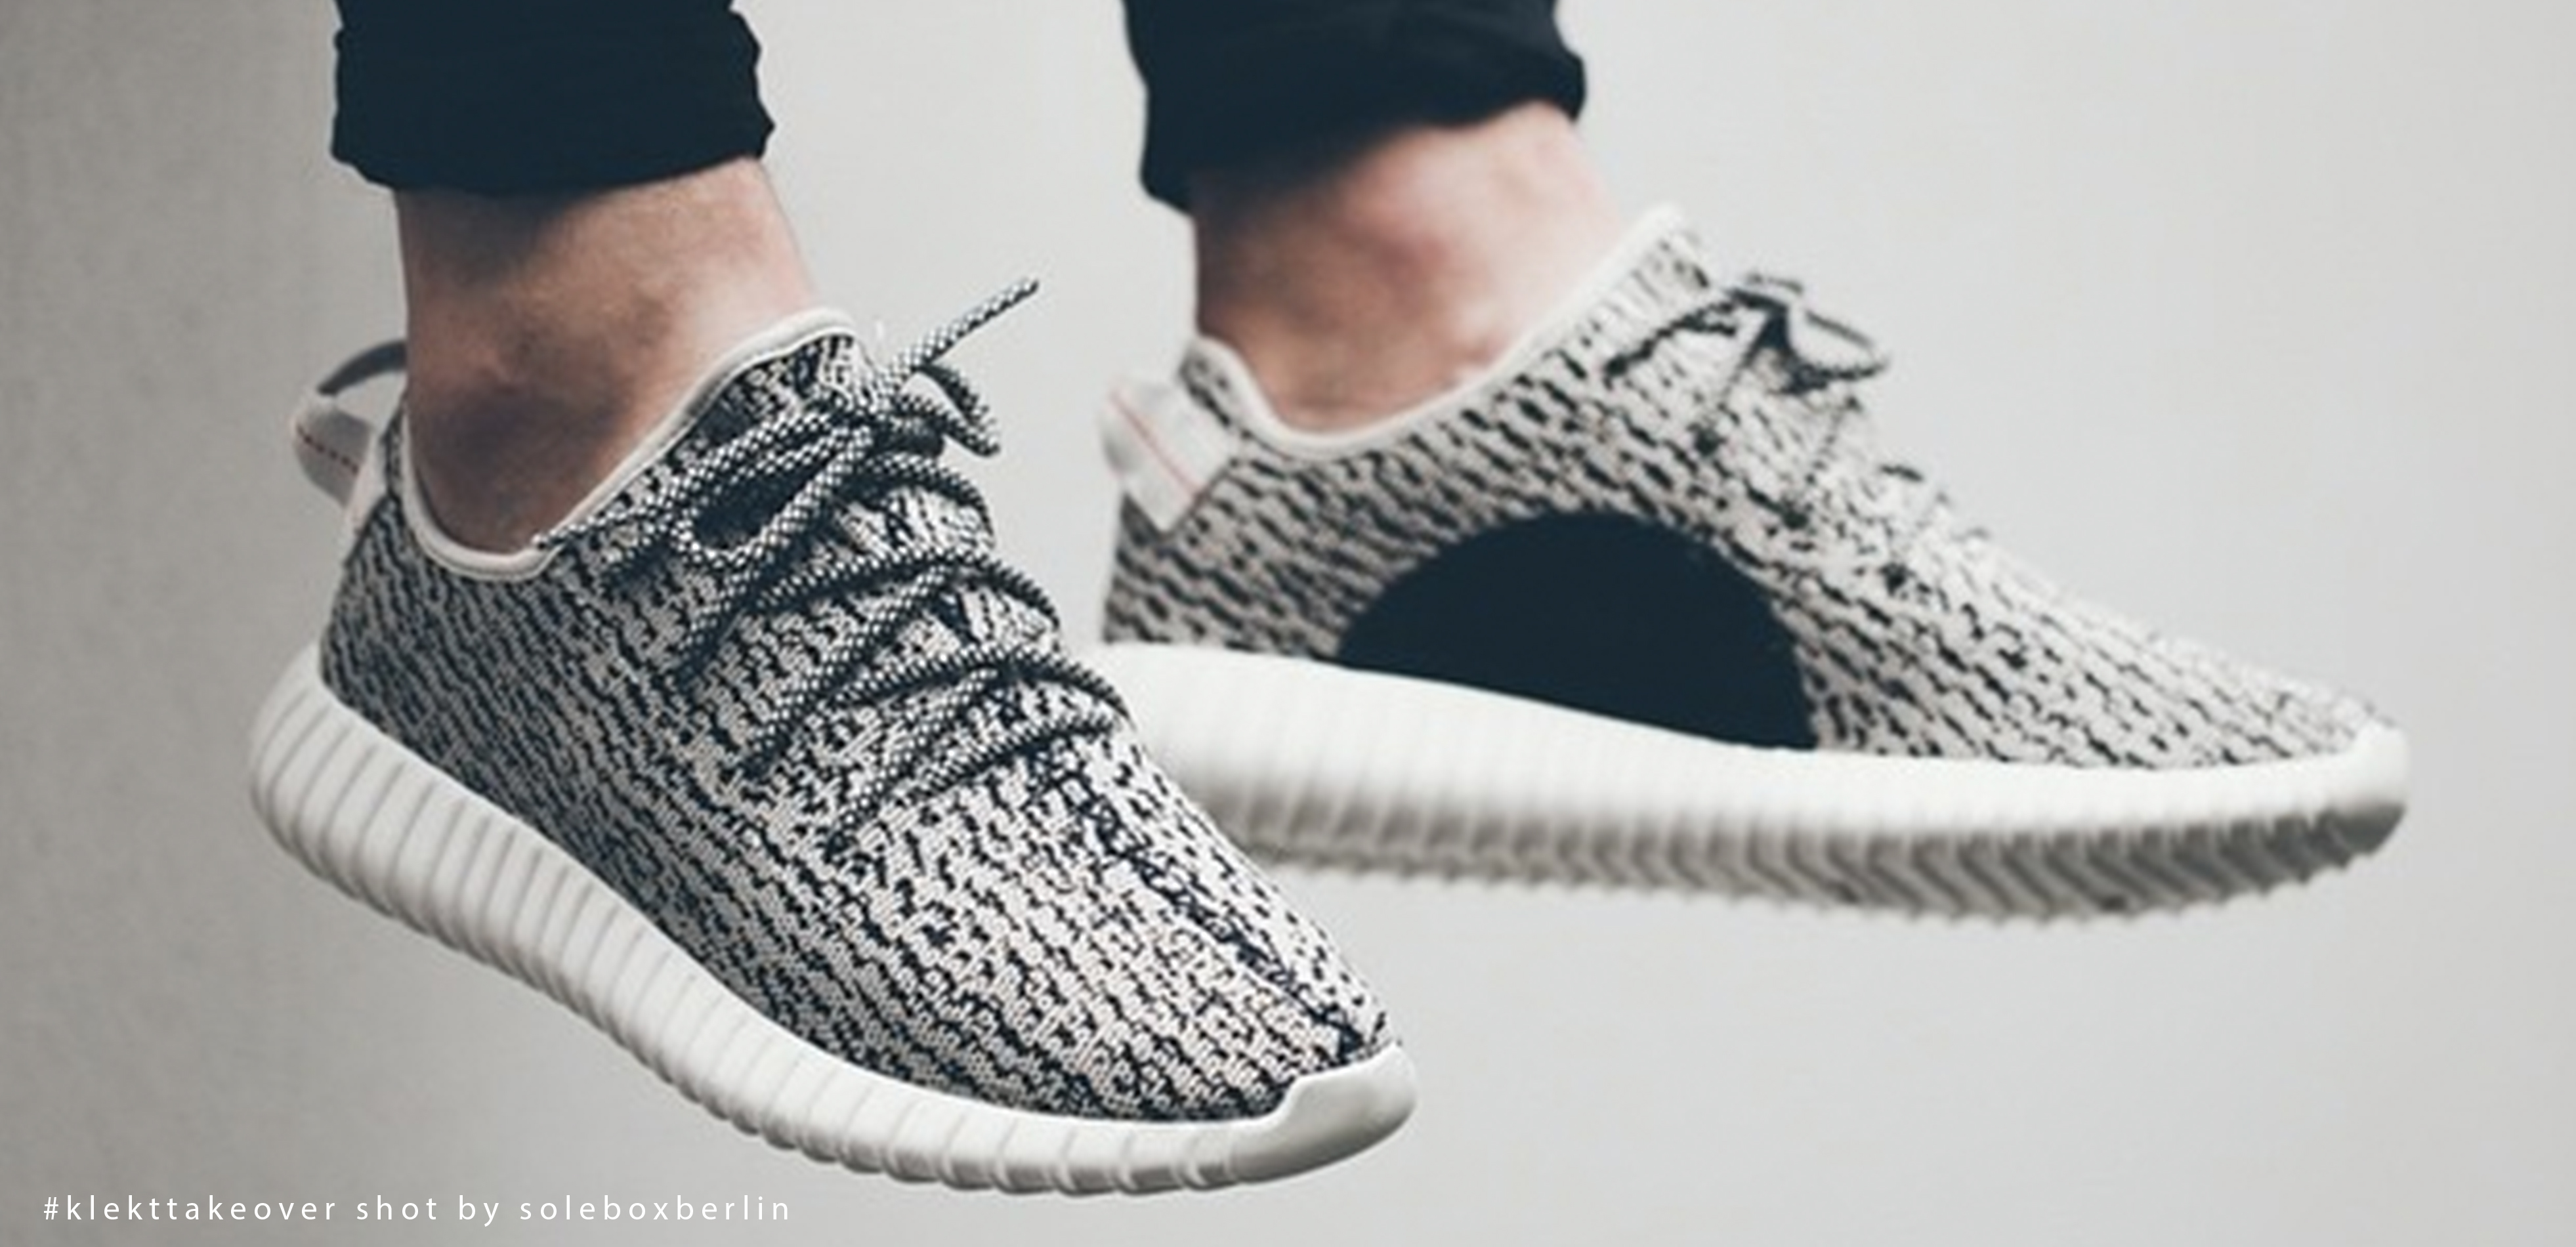 From Dhgate seller adidas yeezy boost 350 turtle dove details show